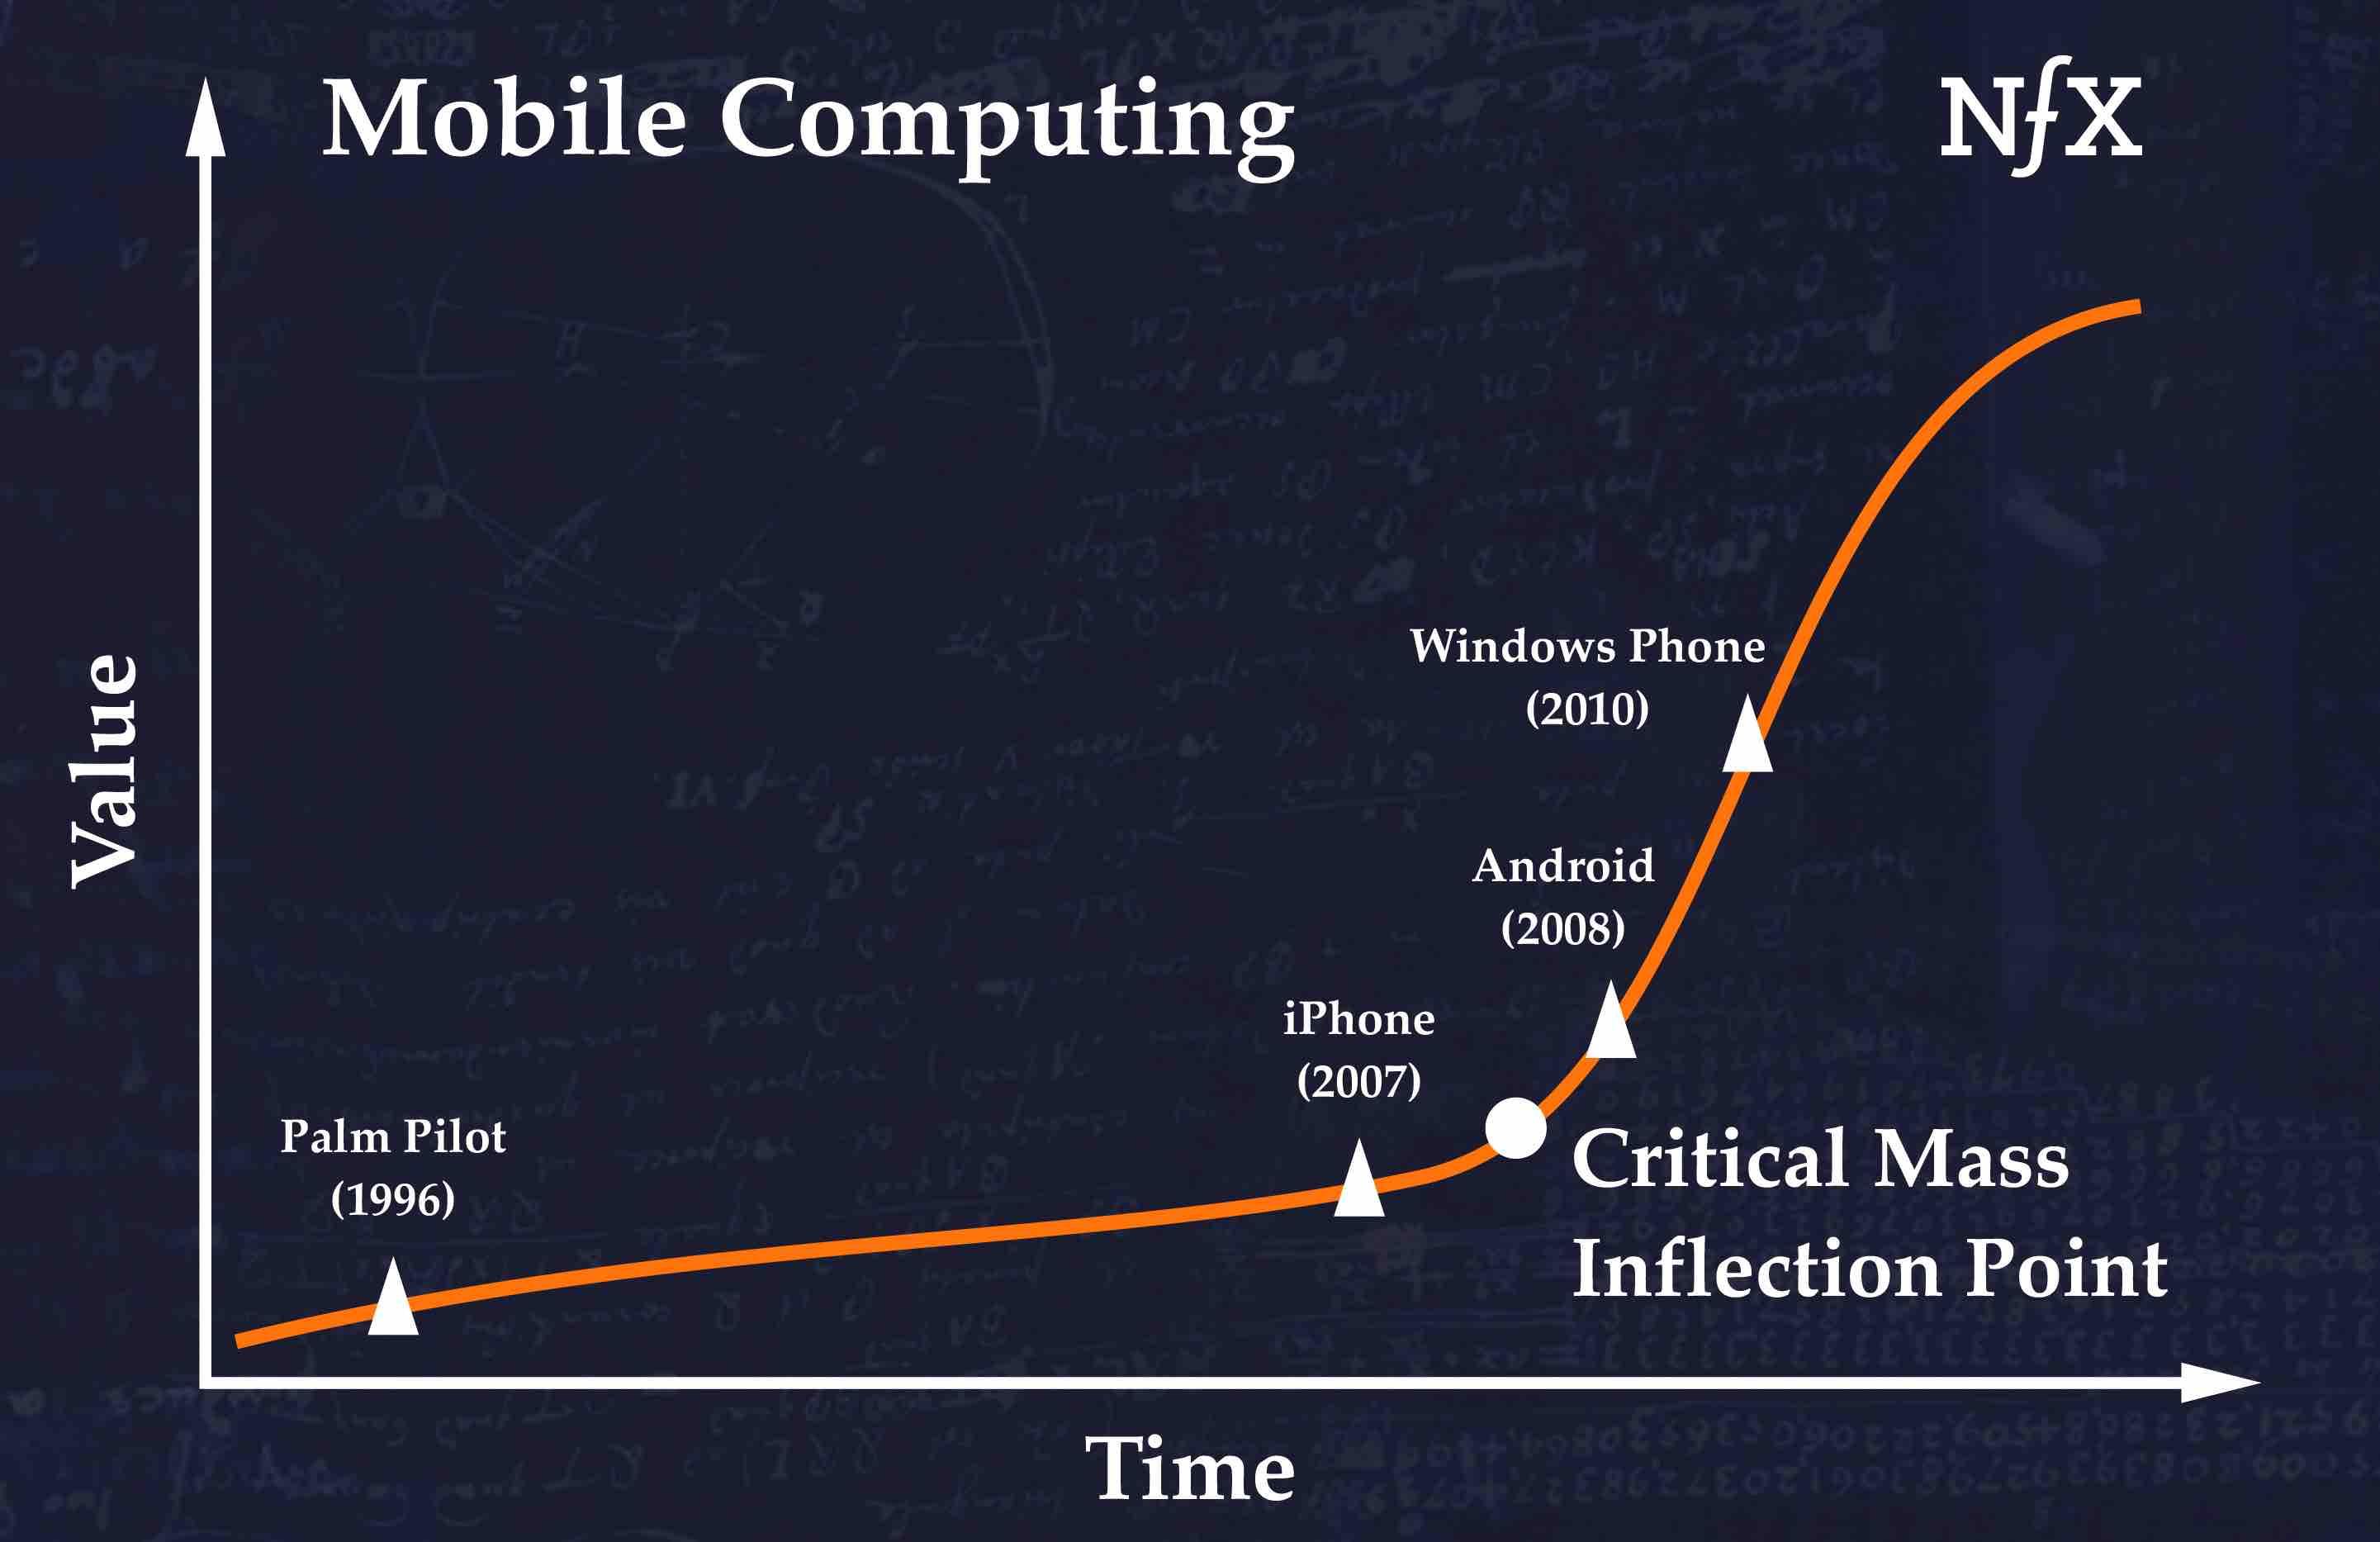 The Ultimate Case Study on Critical Mass: iPhone